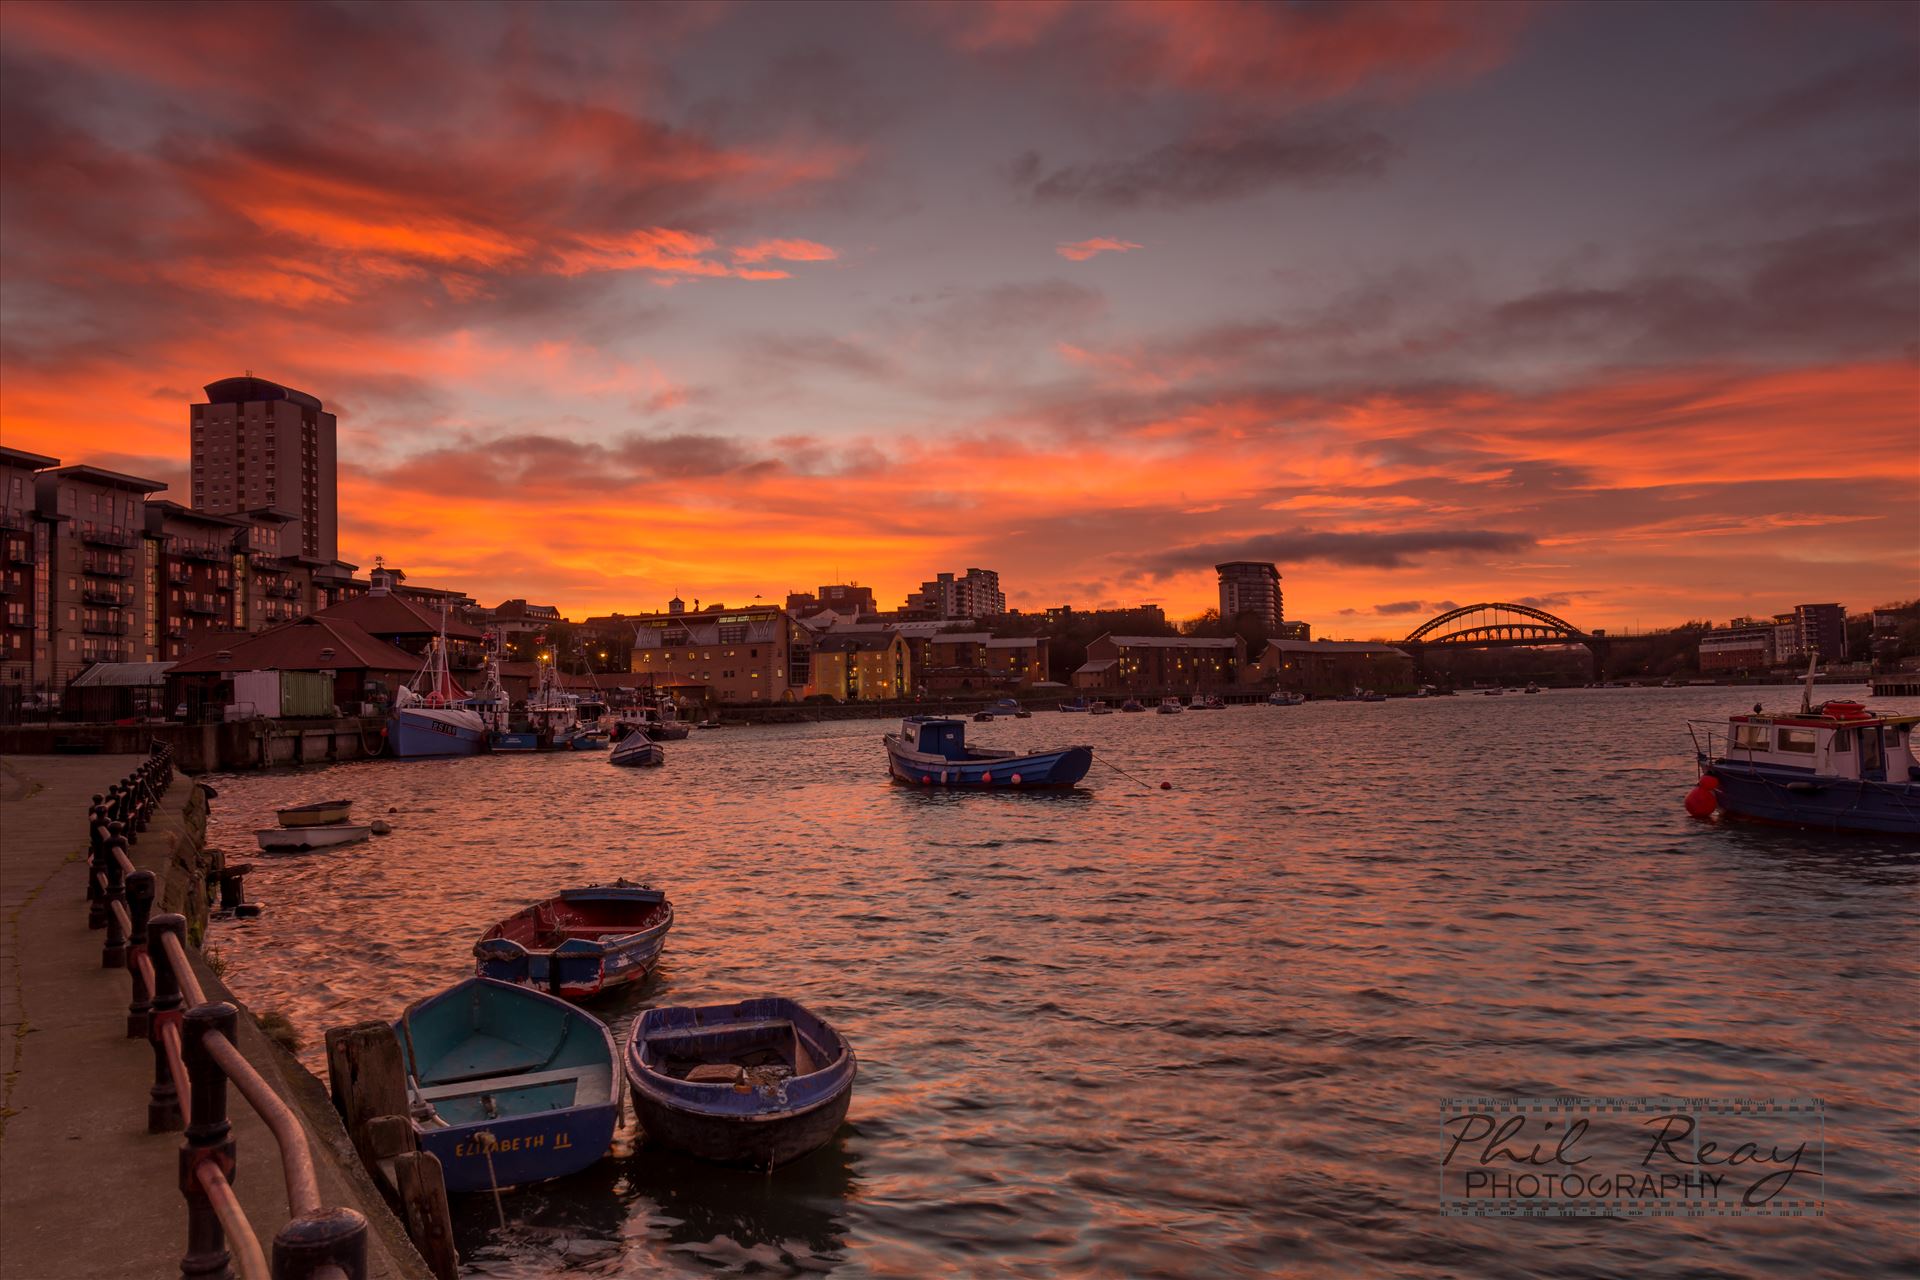 Sky on Fire A fabulous sunset at Sunderland Fish Quay by philreay